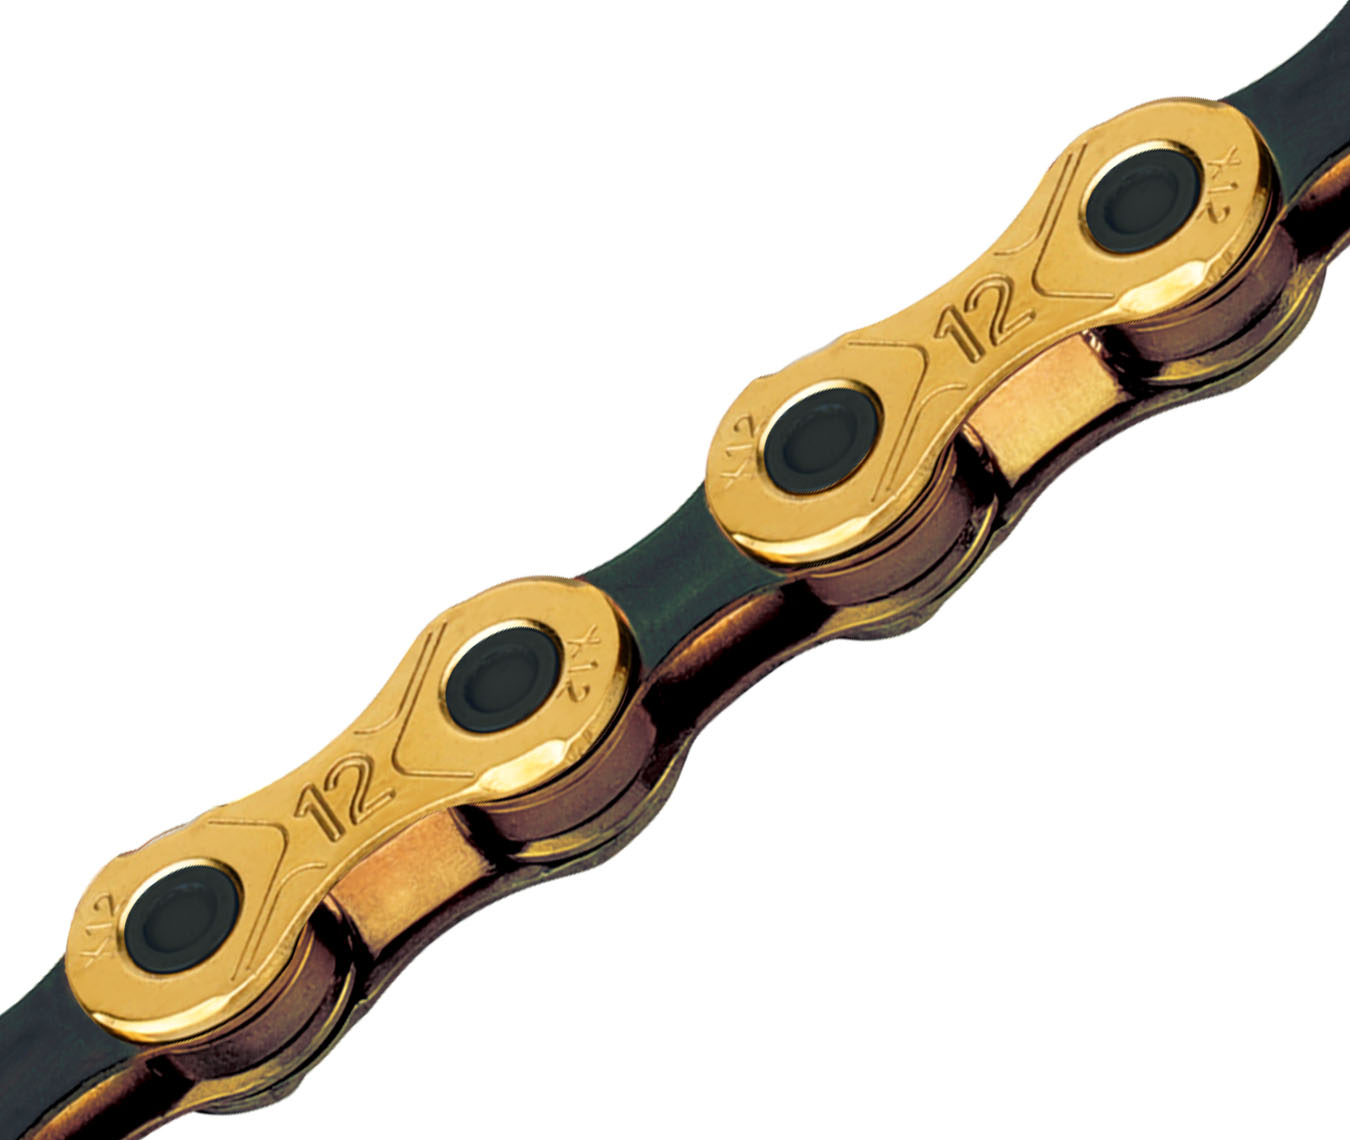 Details about   KMC X12 12 Speed 126L MTB Road Bike Chain 12s Golden Chain with Magic Link 